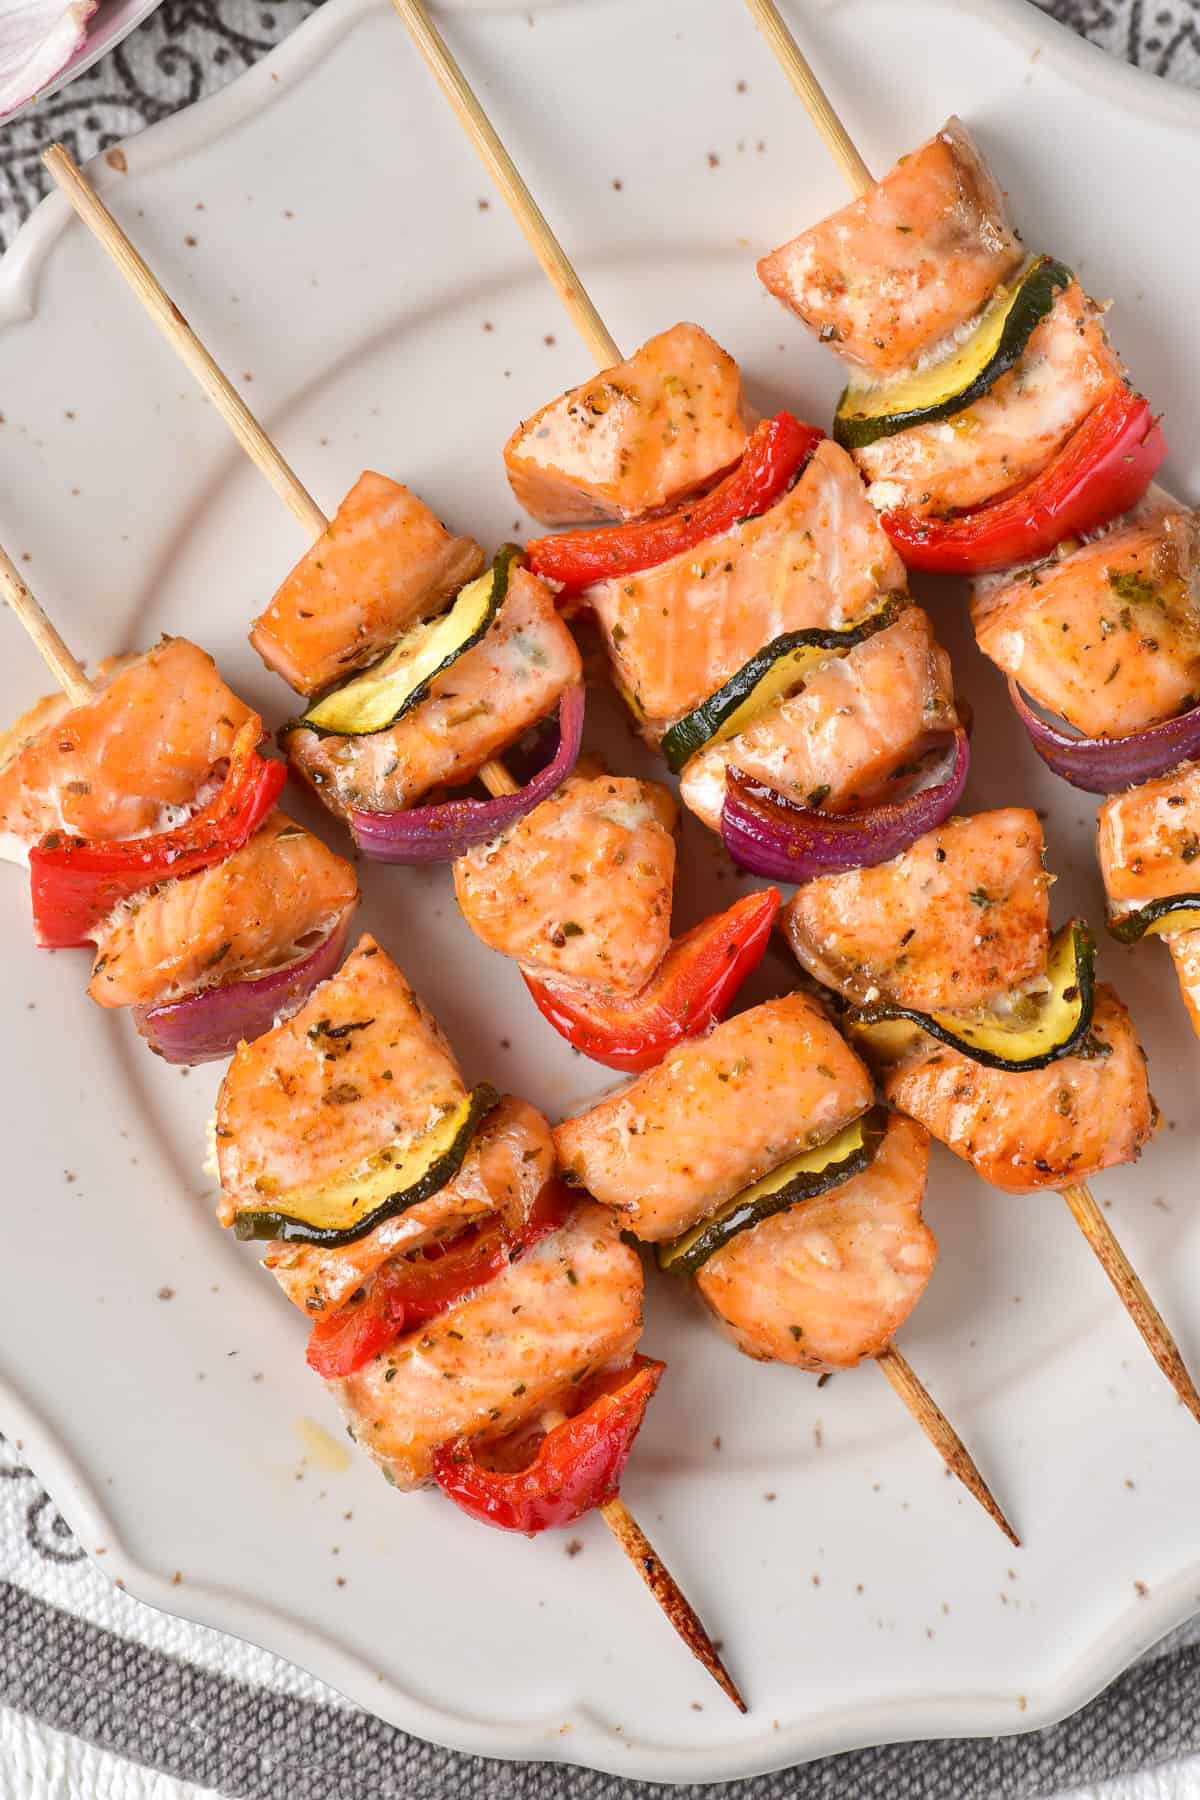 Salmon skewers on a white plate.